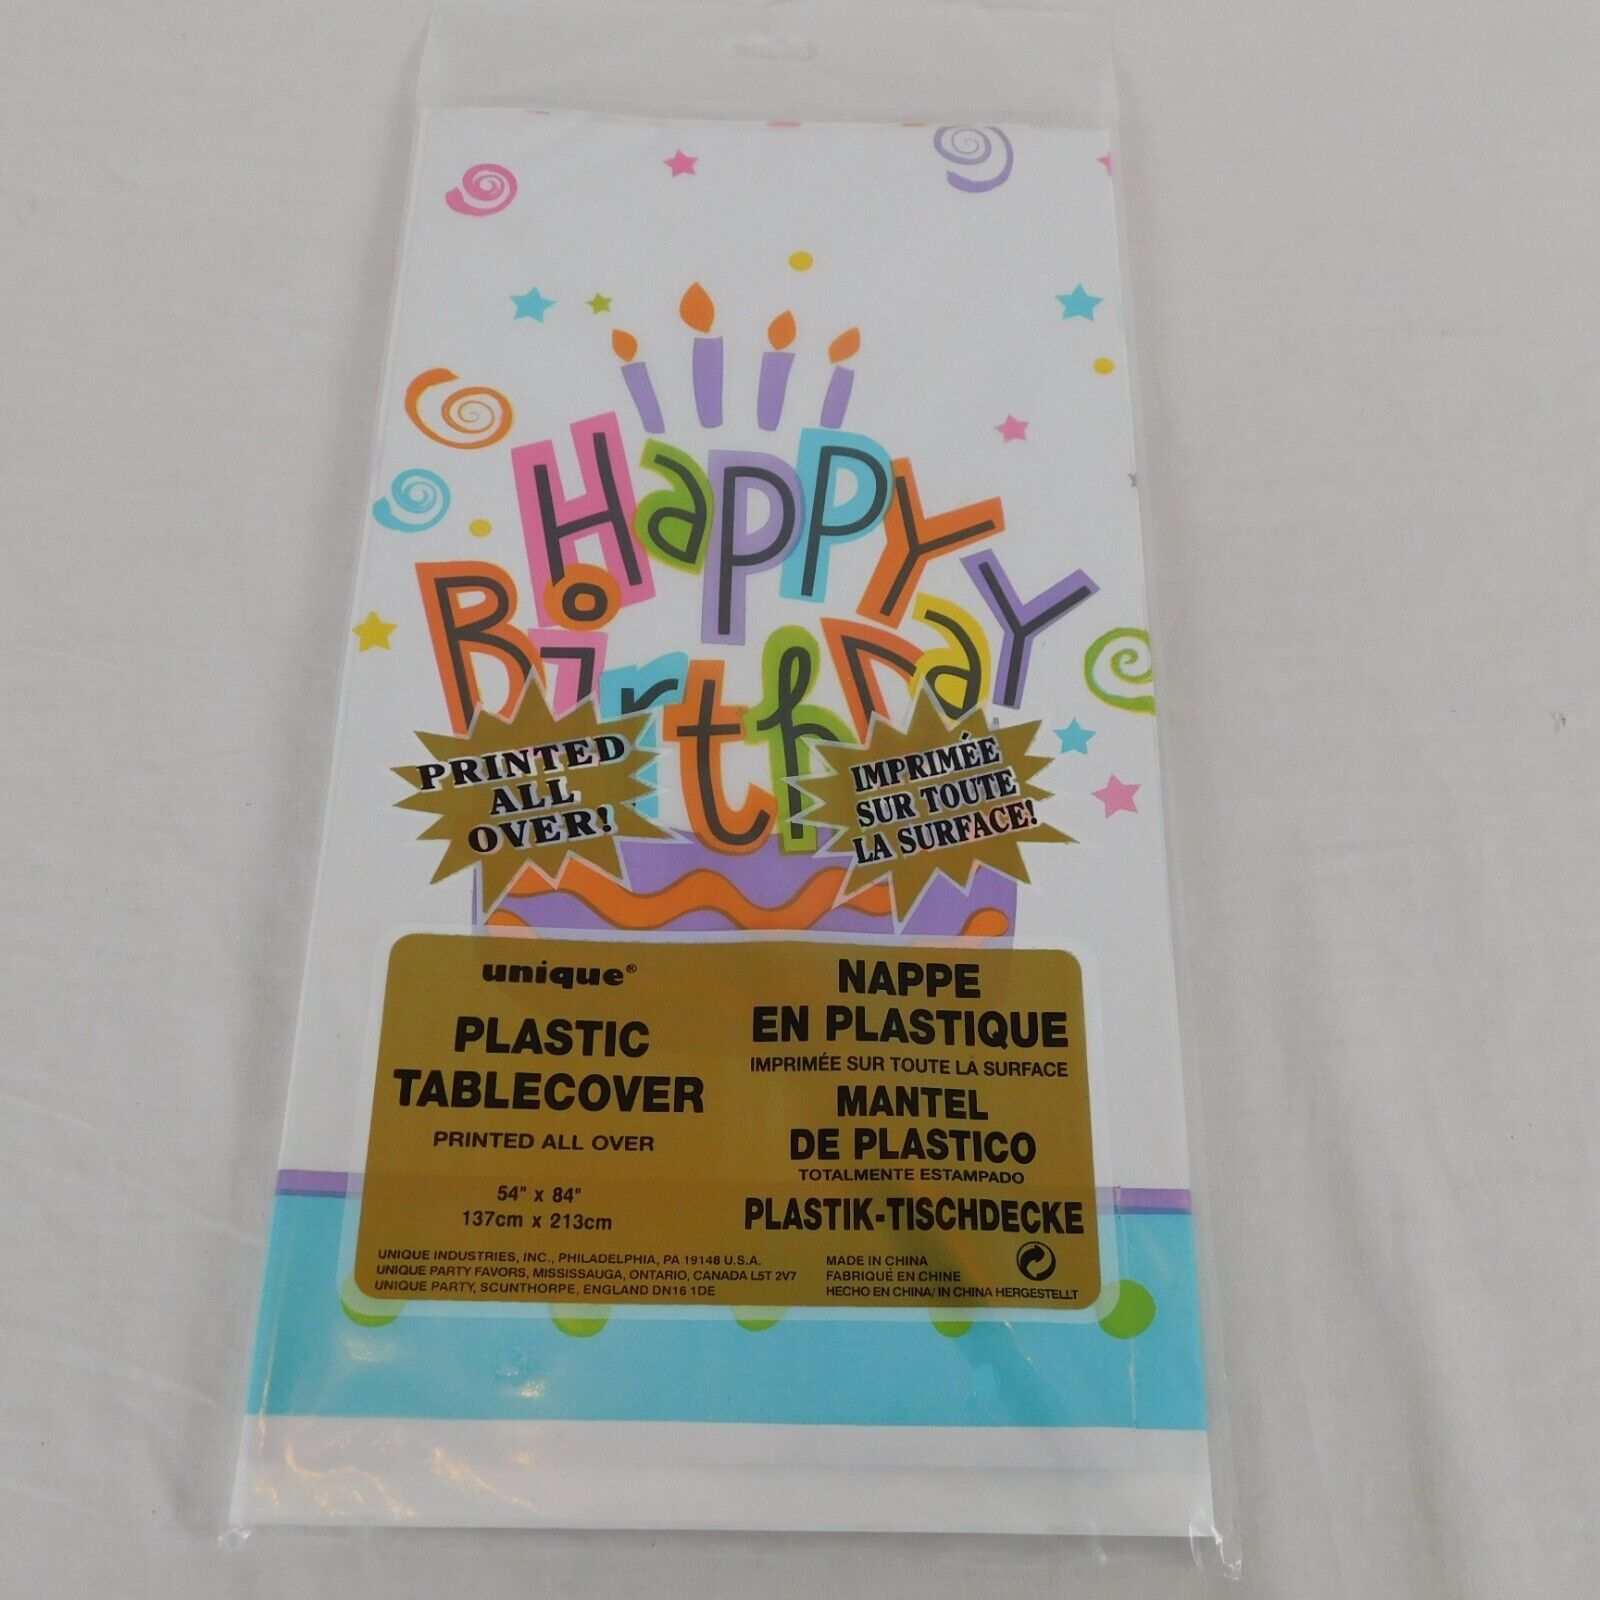 Happy Birthday Treat Plastic Tablecover 54" x 84" Rectangle Unique Industries - $5.95